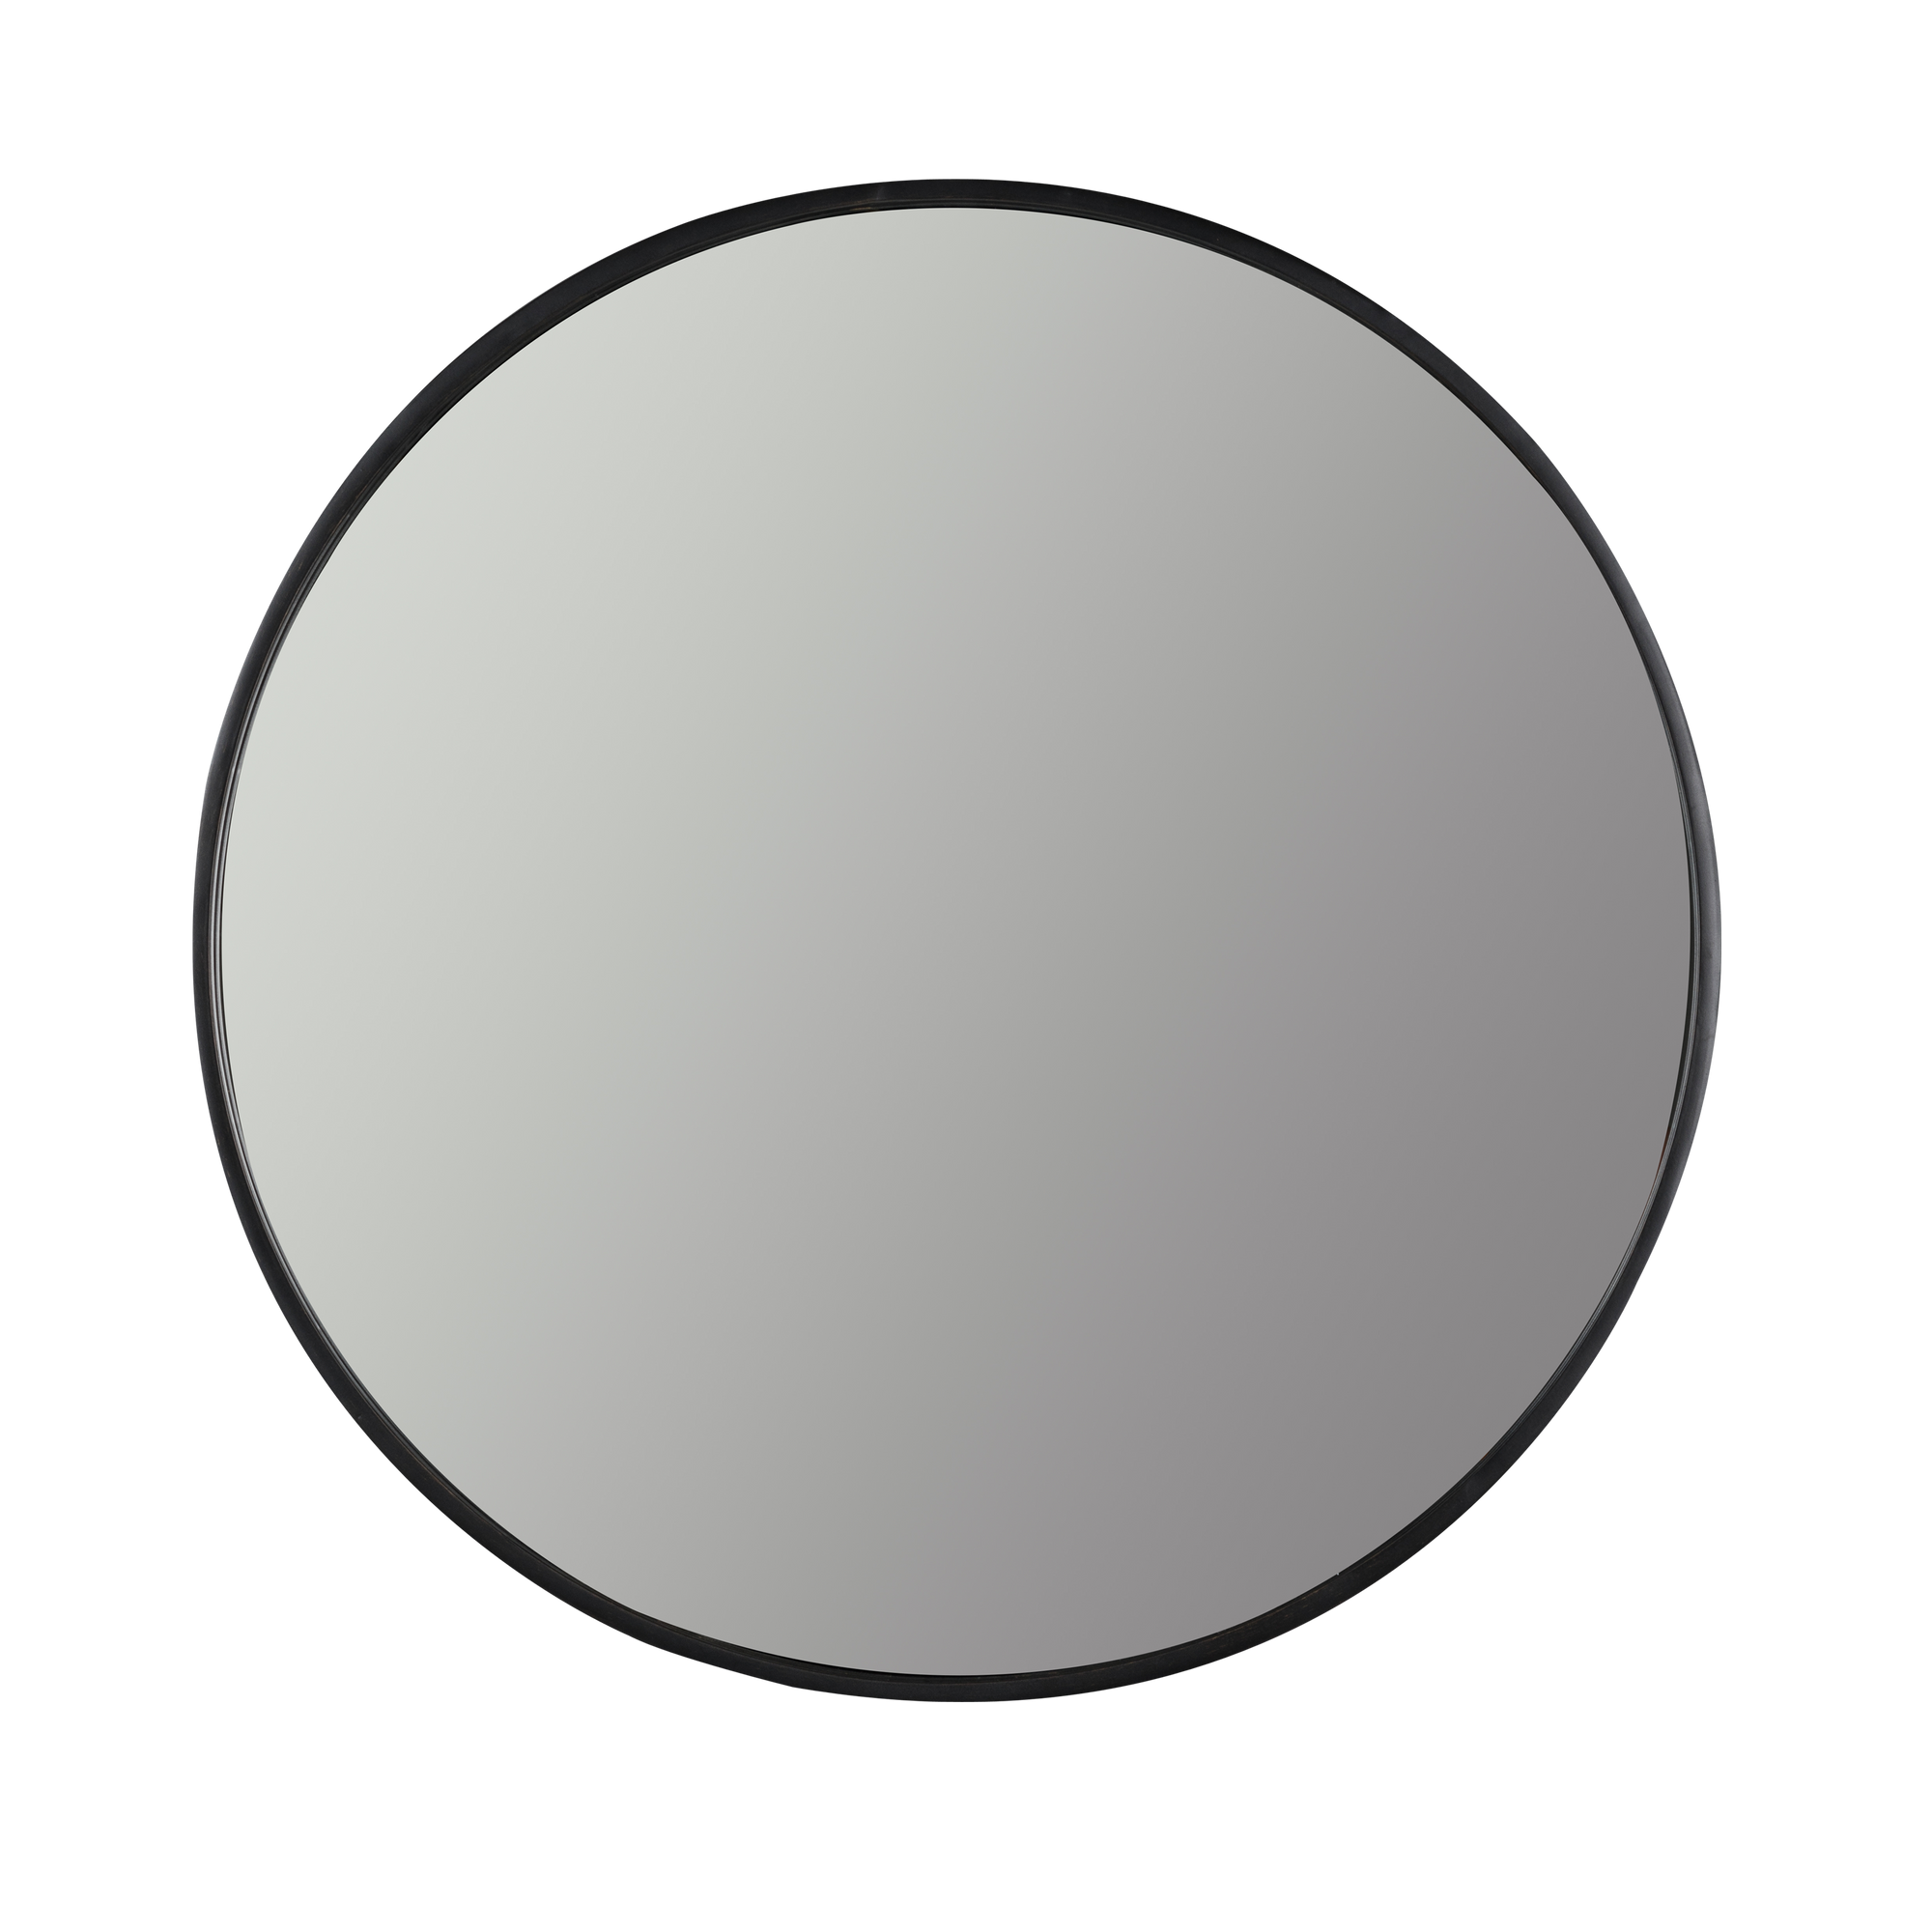 The Sloane Round Wall Mirror is a classic round mirror with a matte black finish on the trim.